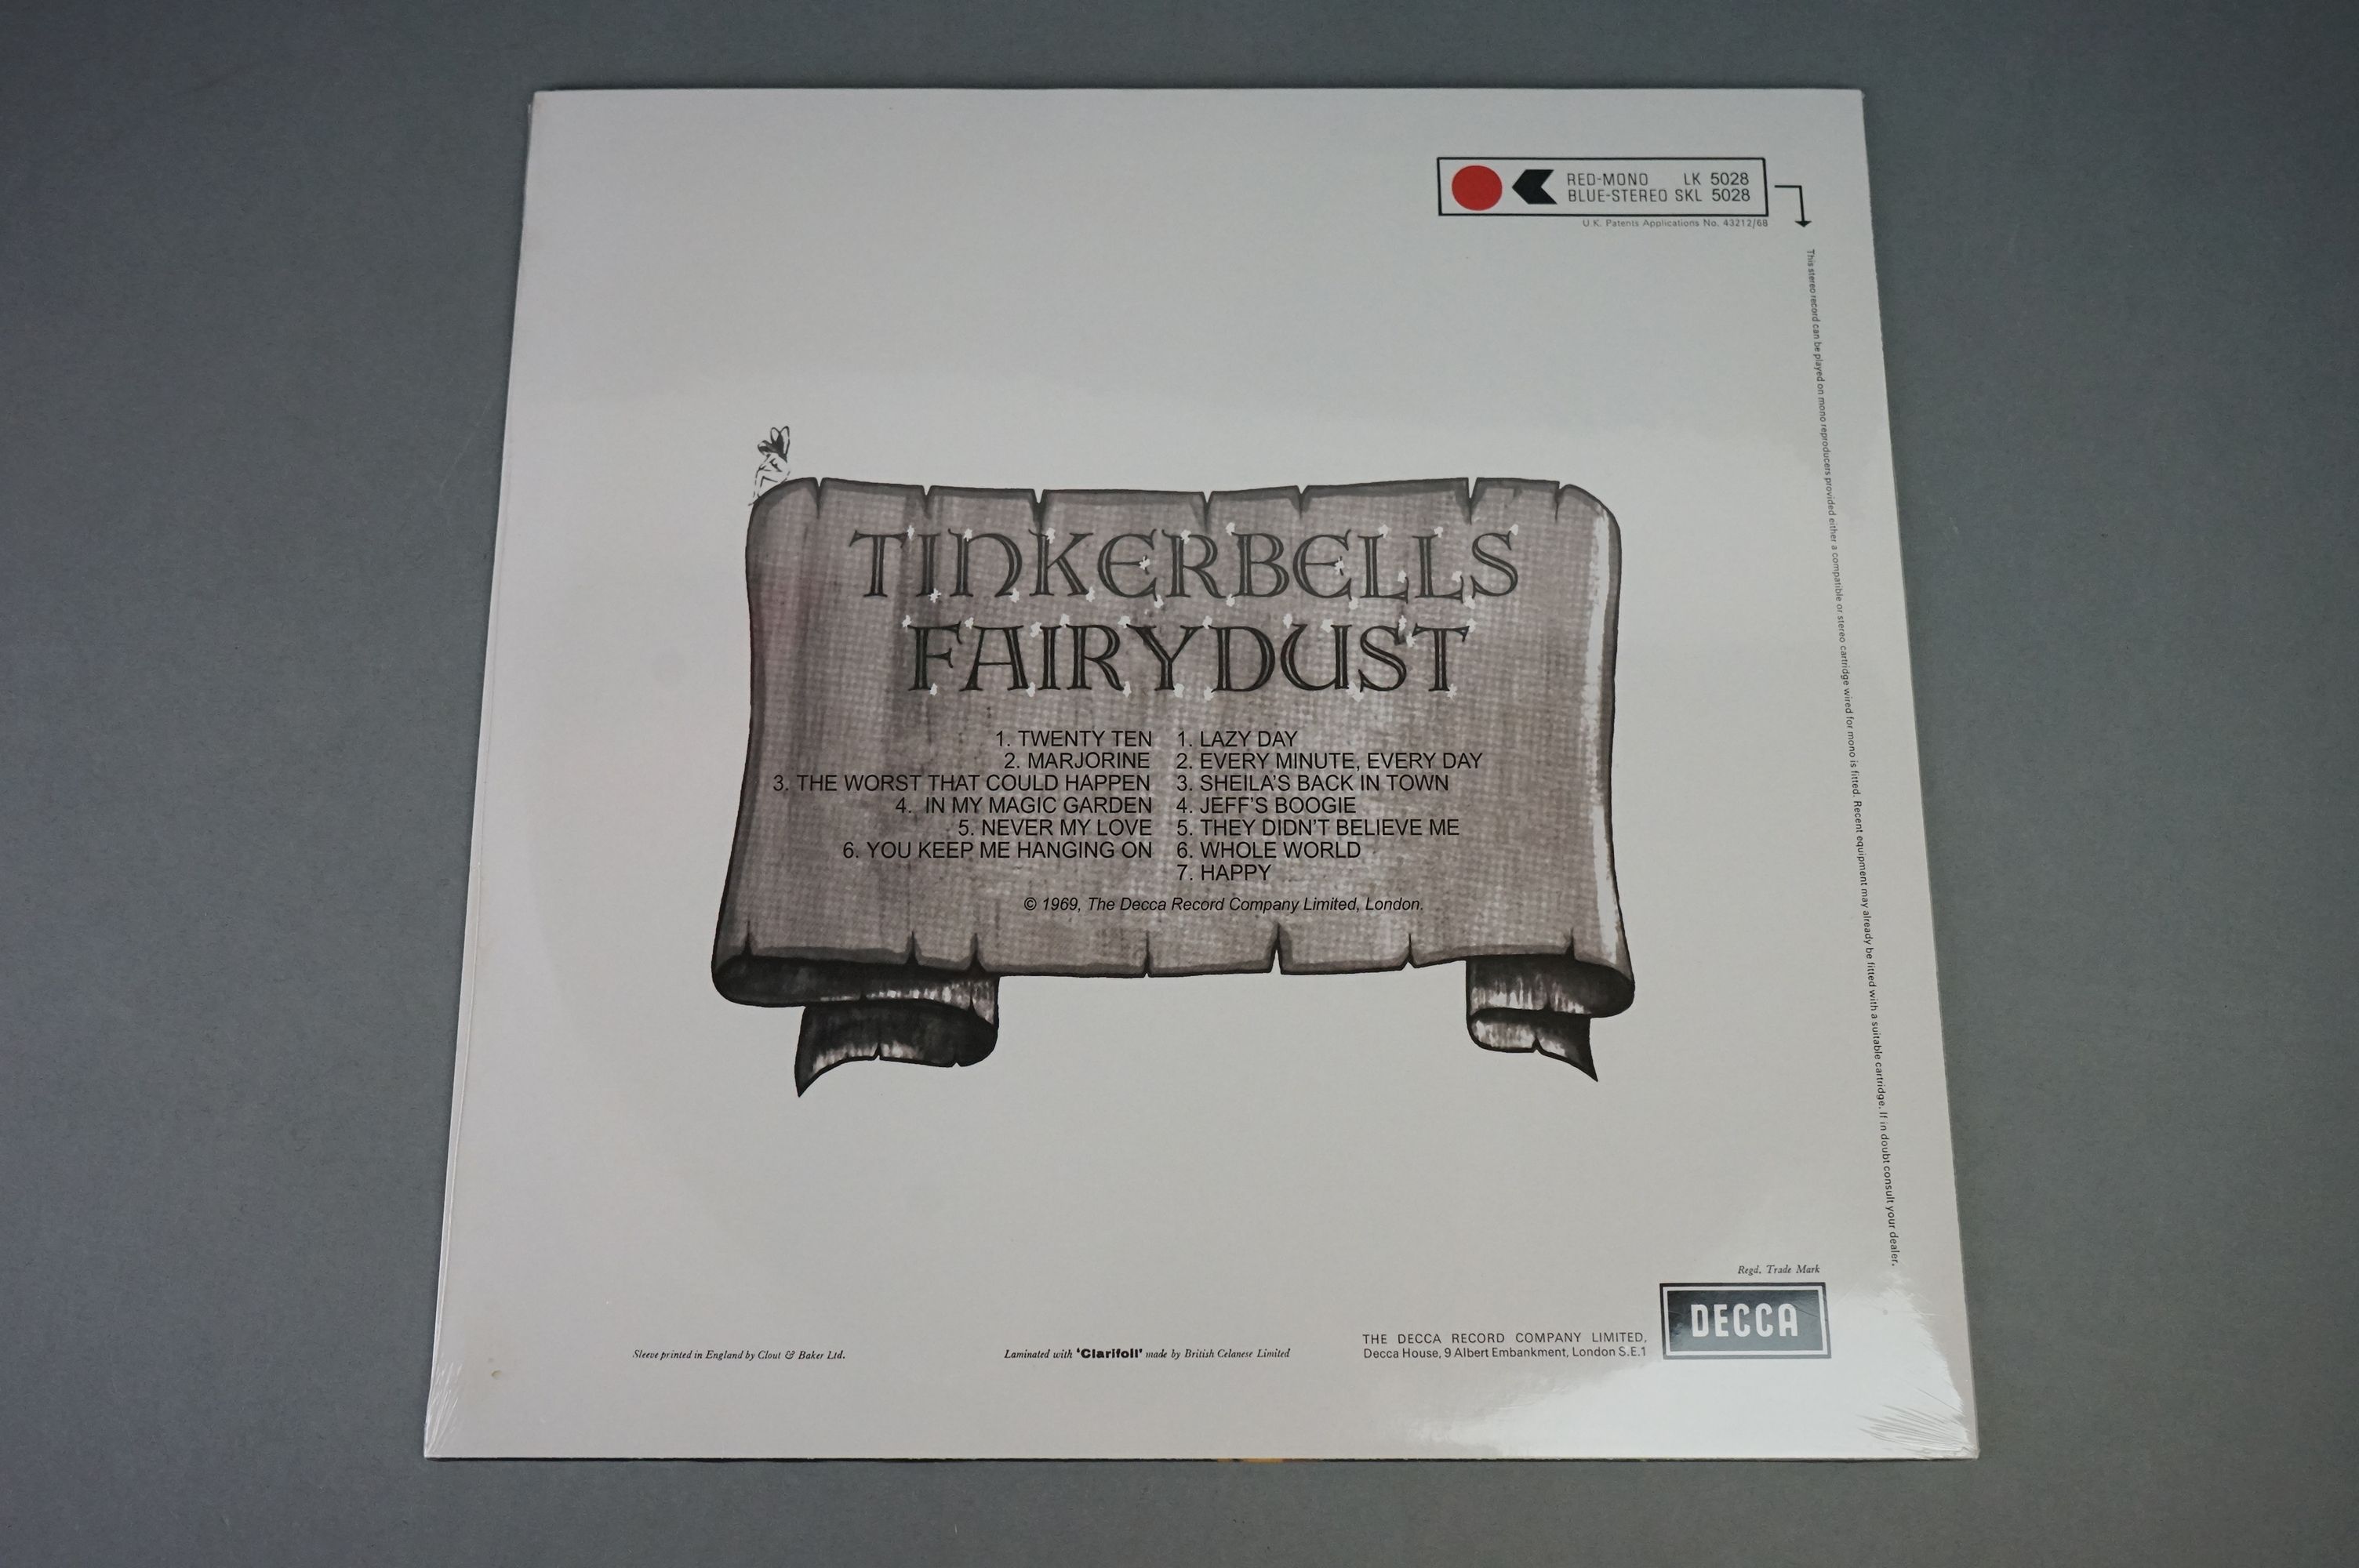 Vinyl - Tinkerbell's Fairydust self titled LP on Acme LK5028, 180gm limited edition 2009, From - Image 4 of 5